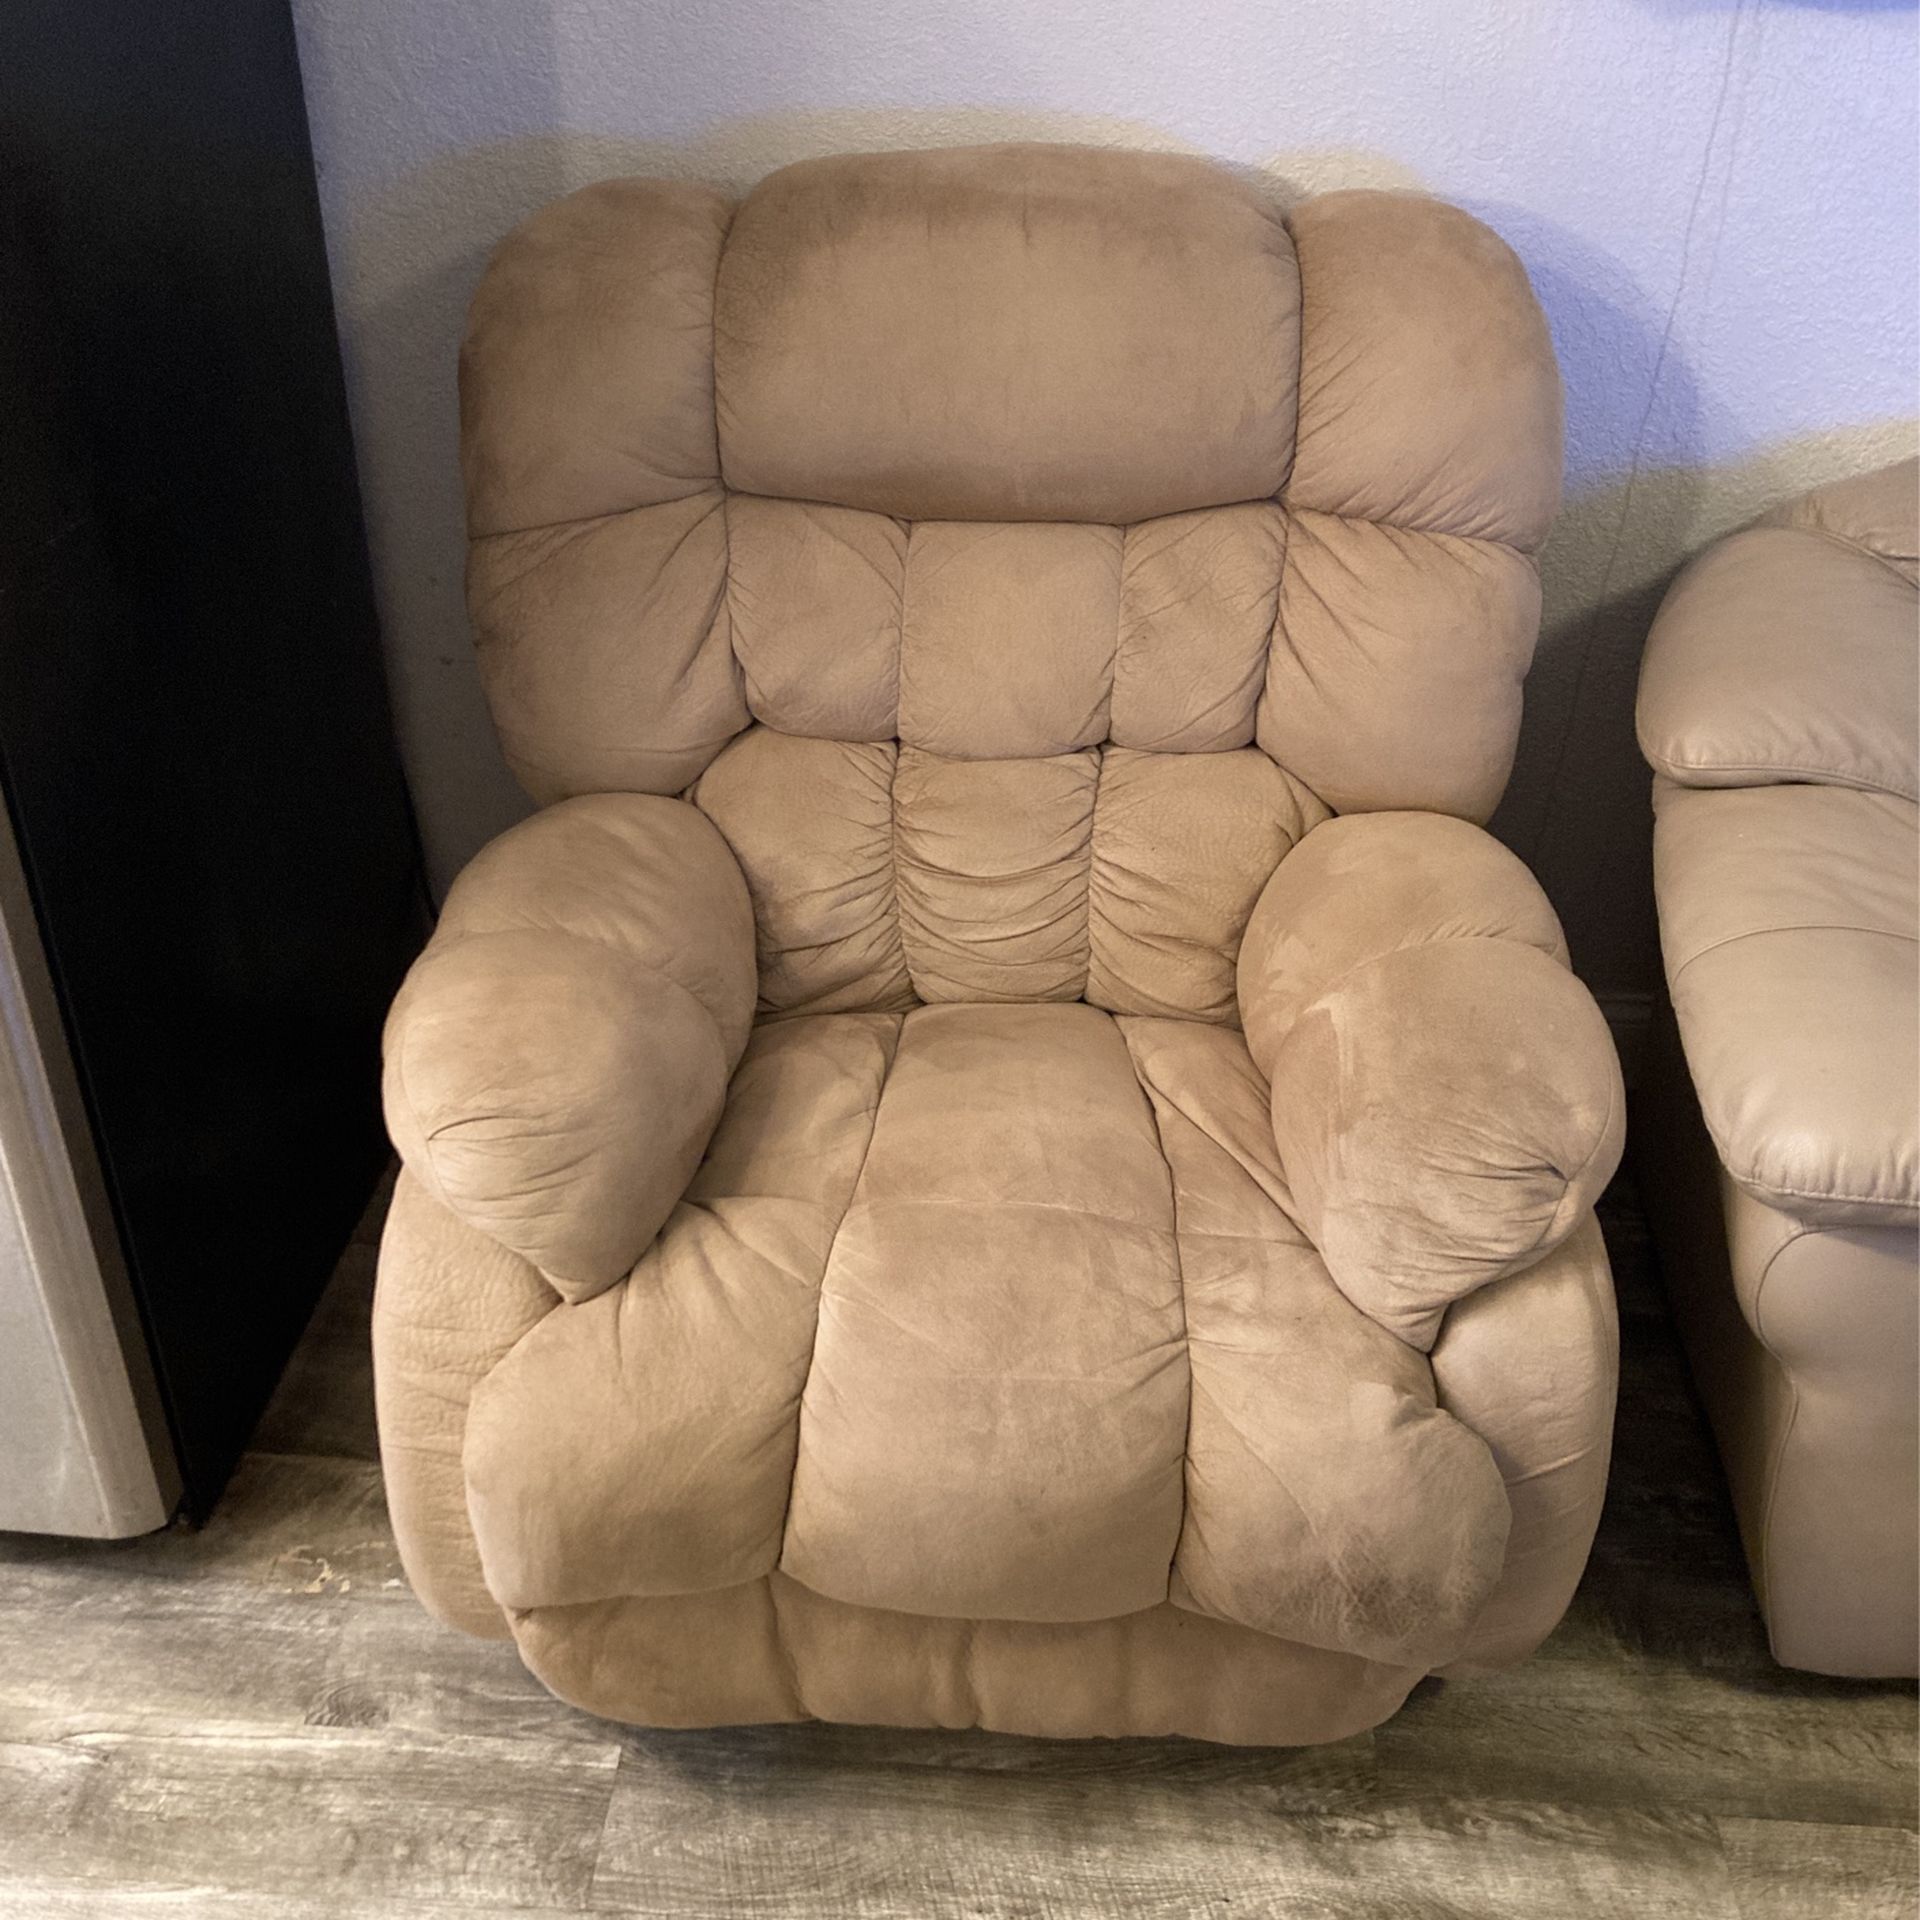 Lazyboy recliner chair 